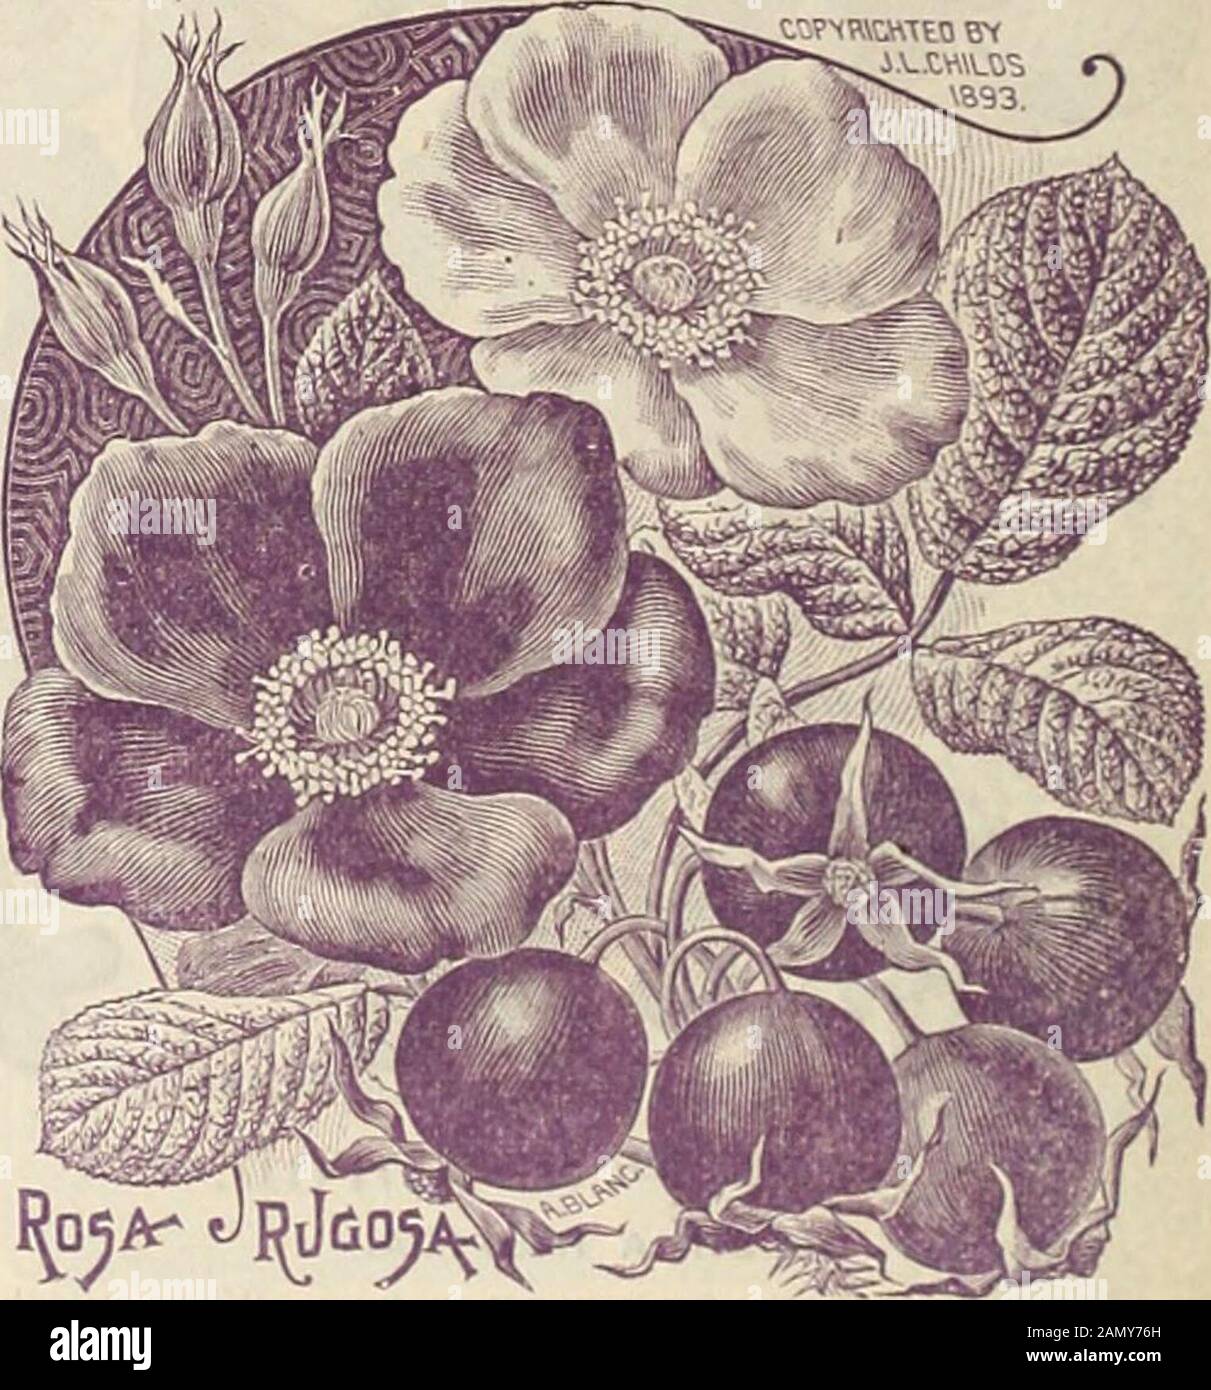 Childs' rare flowers, vegetables & fruits for 1895 . A new hardy Orange. This is the most hardy of theOrange family, and will .stjind our northern climate withlittle or no protection. In the parks of both New York andPhiladelphia it is growing luxuriantly, and bloom-ingand fruiting profusely. Think of it; you Citn havean Orange tree growing, blooming and fruiting onyour lawn or yard. It is dwarf, of low, symmetricalgrowth, with beautiful trifoliate?, glossy-green leaves,and abundance of large white blossoins. The fruitis small, bright onmgc-red in color. The fine appear-ance of the plant, with Stock Photo